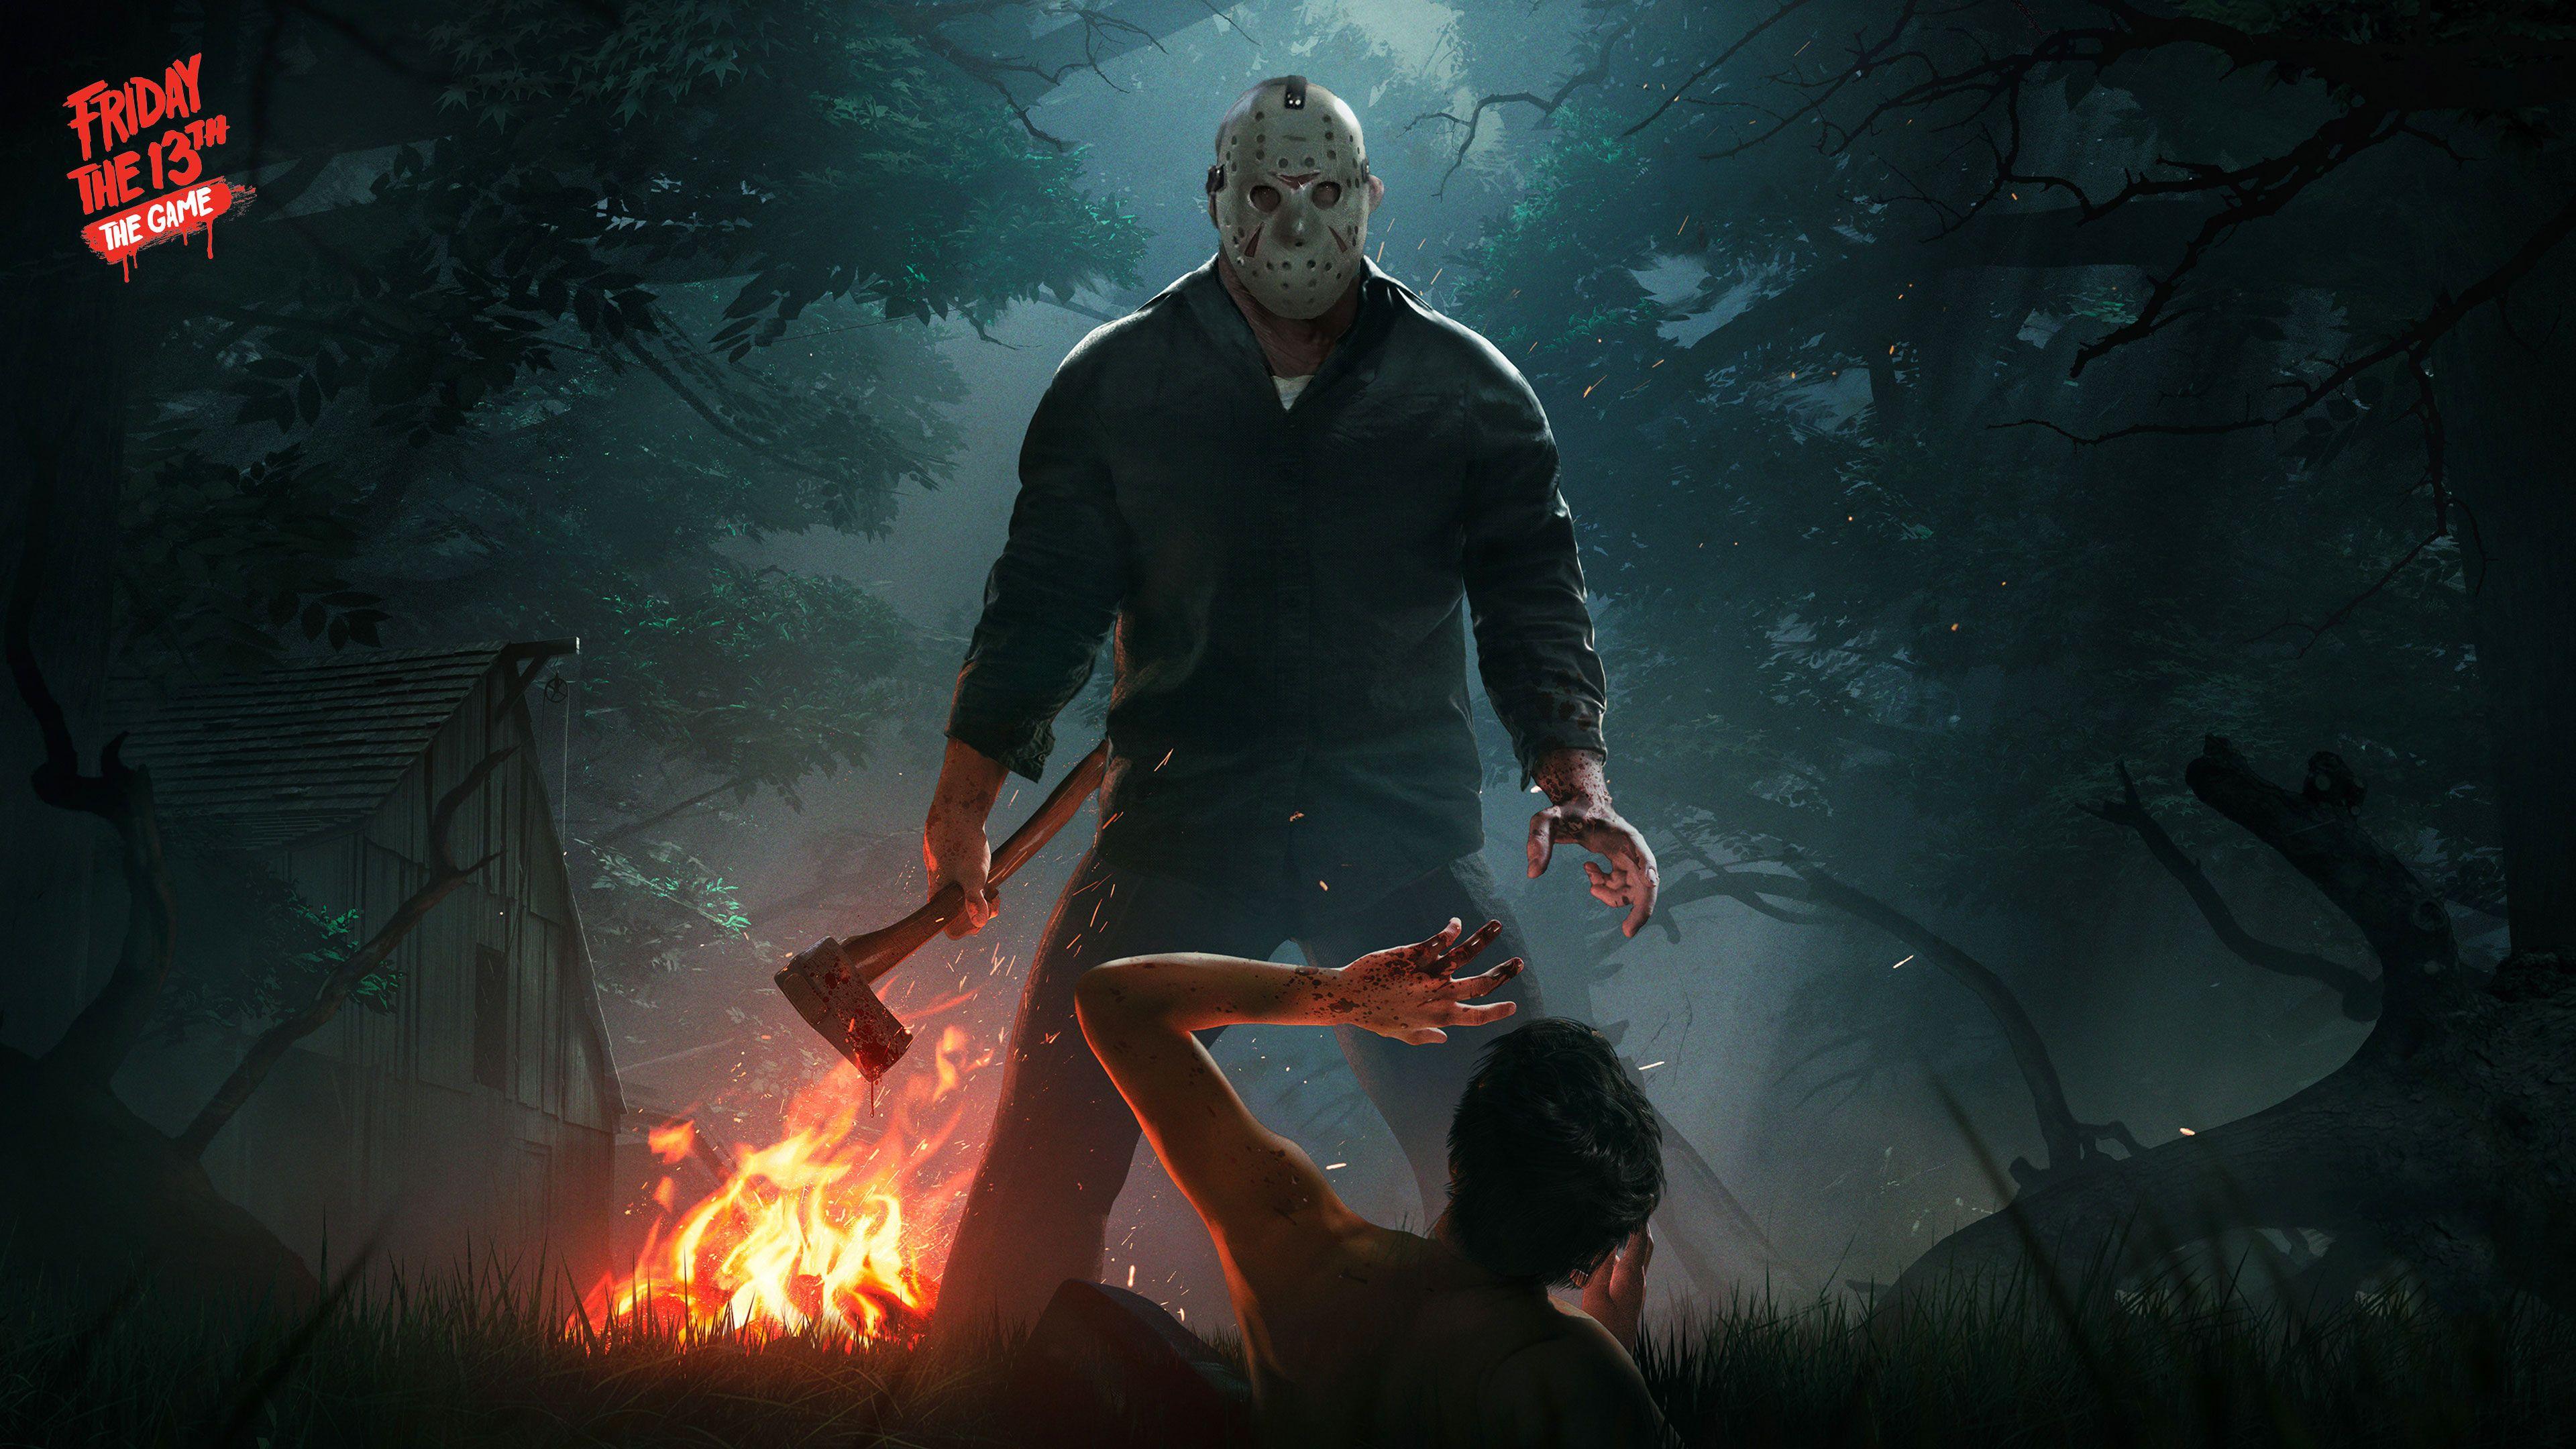 3840x2160 Friday the 13 the game Wallpaper in Ultra HD